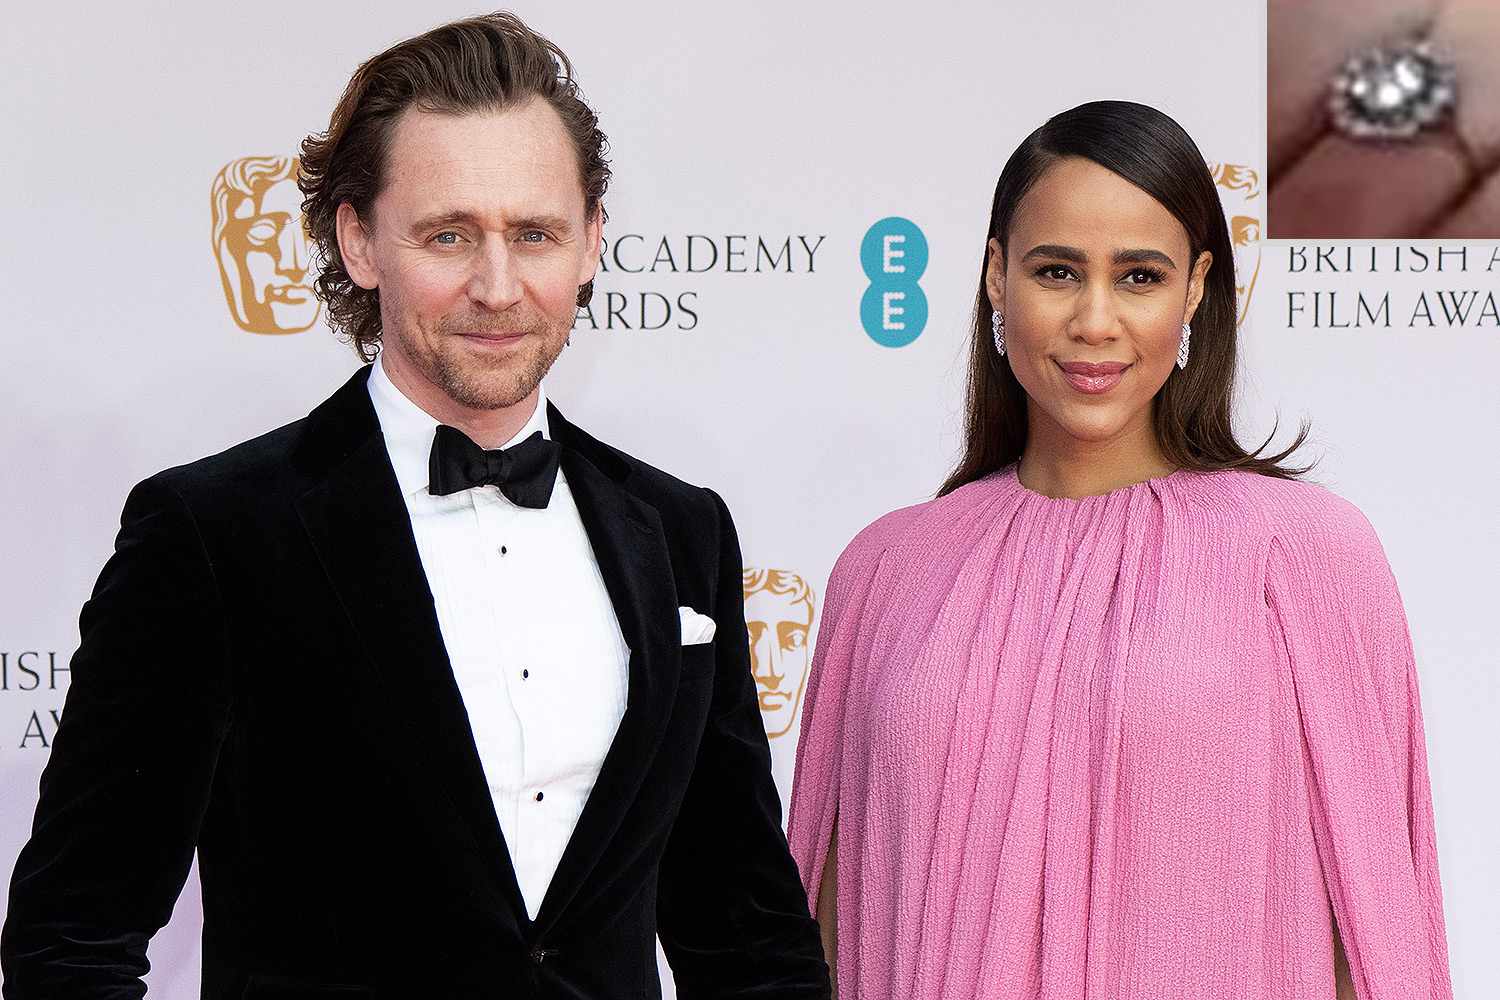 Get a Closer Look at Zawe Ashton’s Gorgeous Engagement Ring from Tom Hiddleston